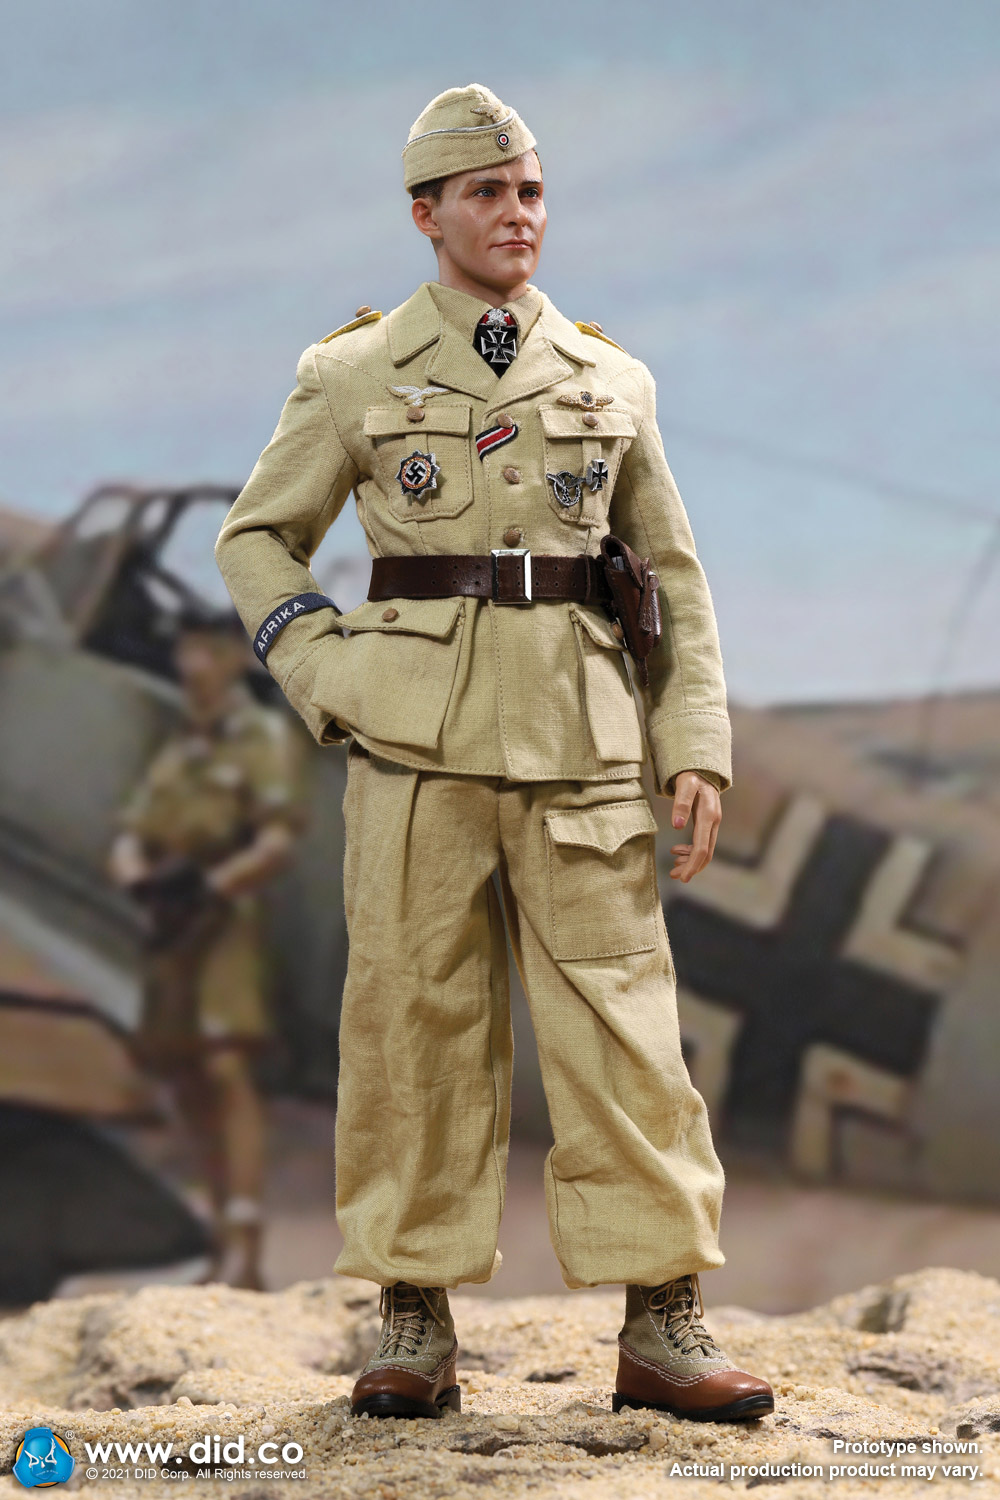 Diorama - NEW PRODUCT: D80154 WWII German Luftwaffe Flying Ace “Star Of Africa” – Hans-Joachim Marseille & E60060  Diorama Of “Star Of Africa” 14321